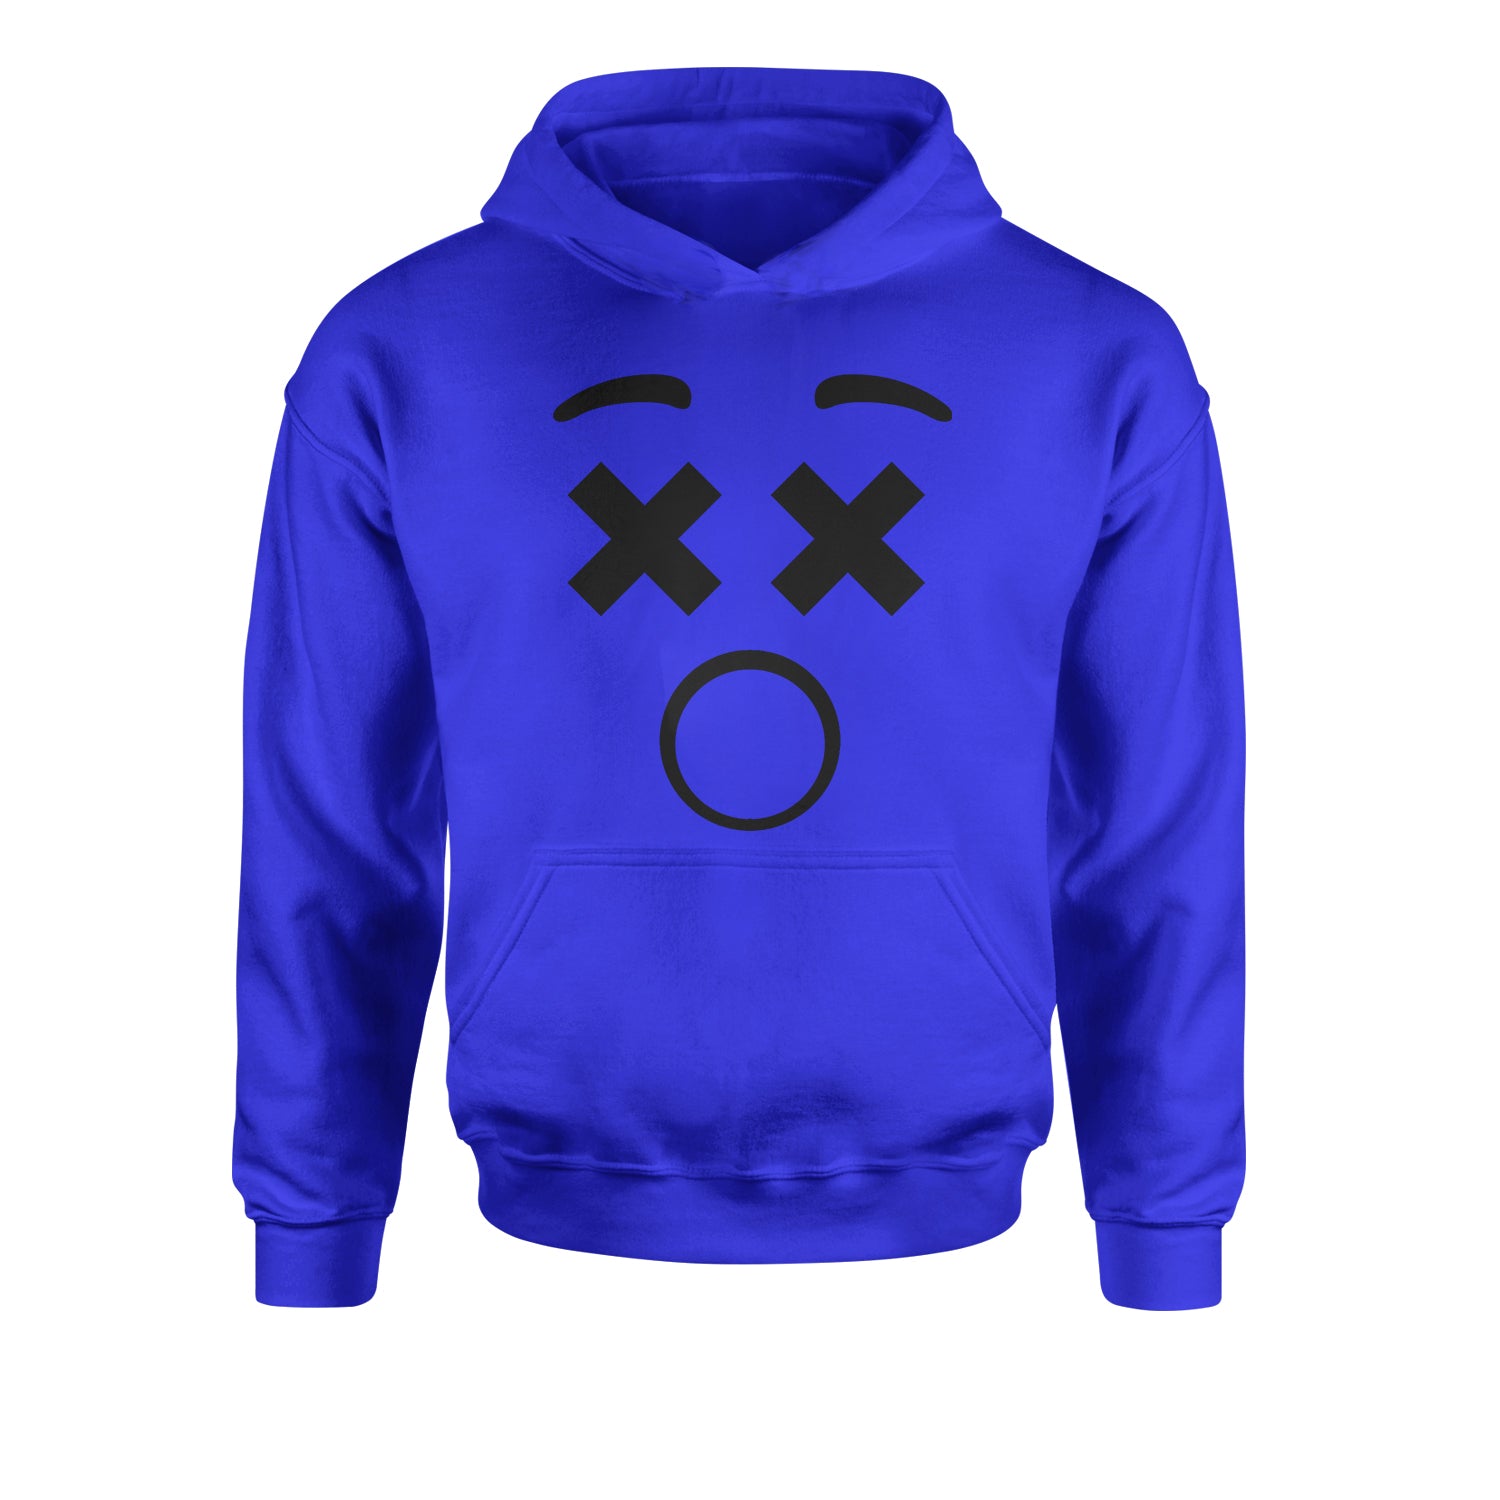 x smiley face hoodie